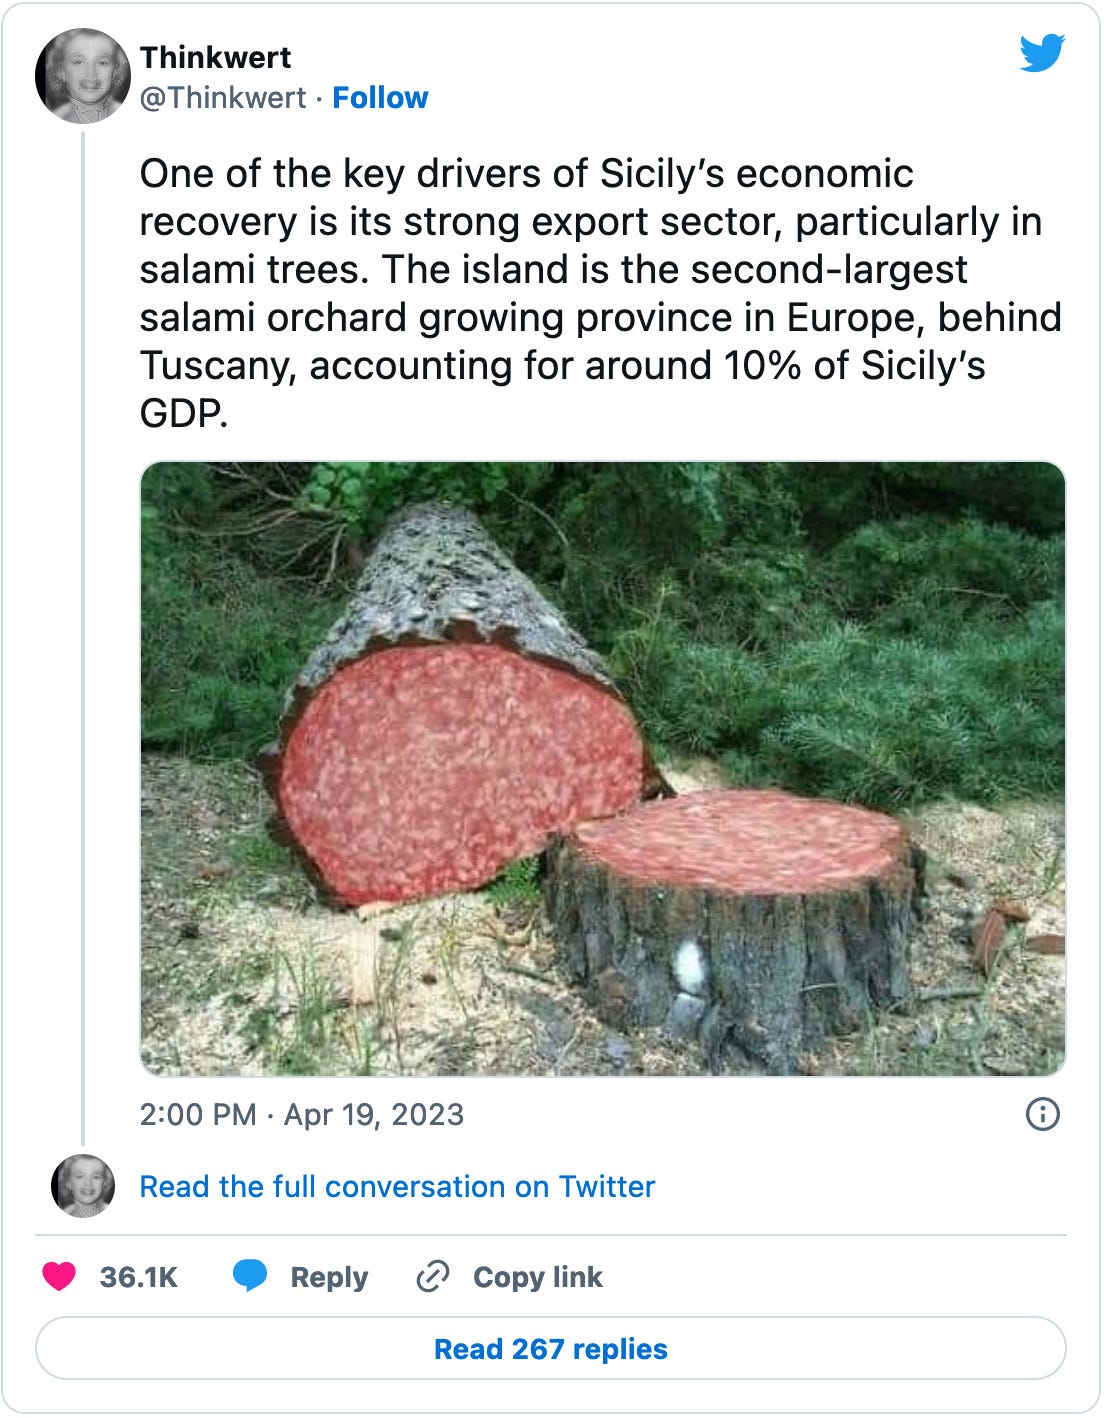 April 19, 2023 tweet from Thinkwert reading "One of the key drivers of Sicily’s economic recovery is its strong export sector, particularly in salami trees. The island is the second-largest salami orchard growing province in Europe, behind Tuscany, accounting for around 10% of Sicily’s GDP" with an attached picture of a large felled tree which appears to be made of salami.